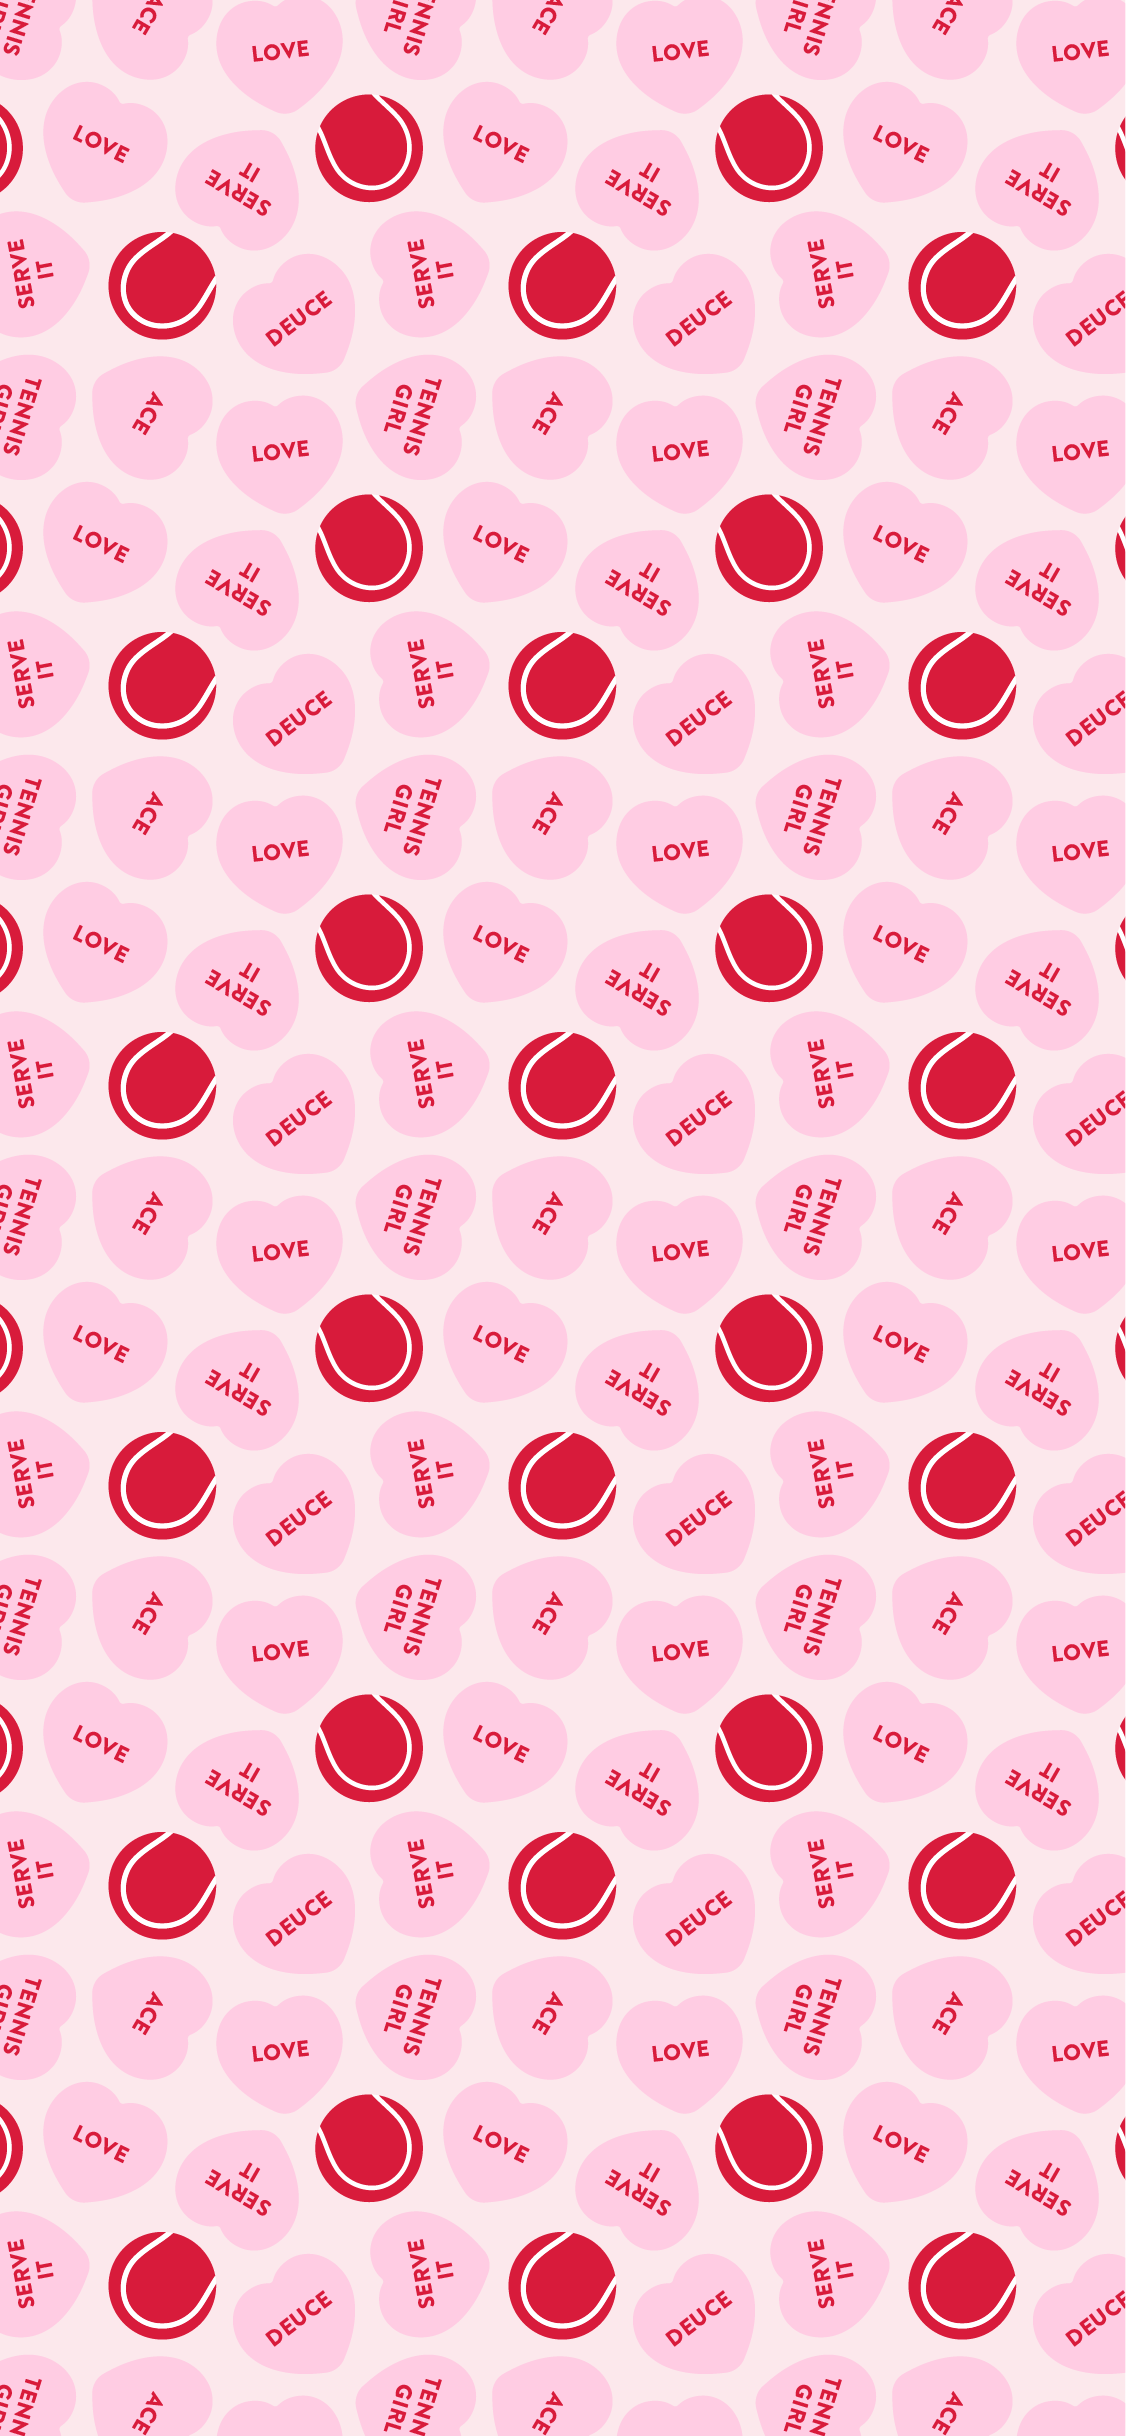 - heart shaped red and white pattern - Valentine's Day, tennis